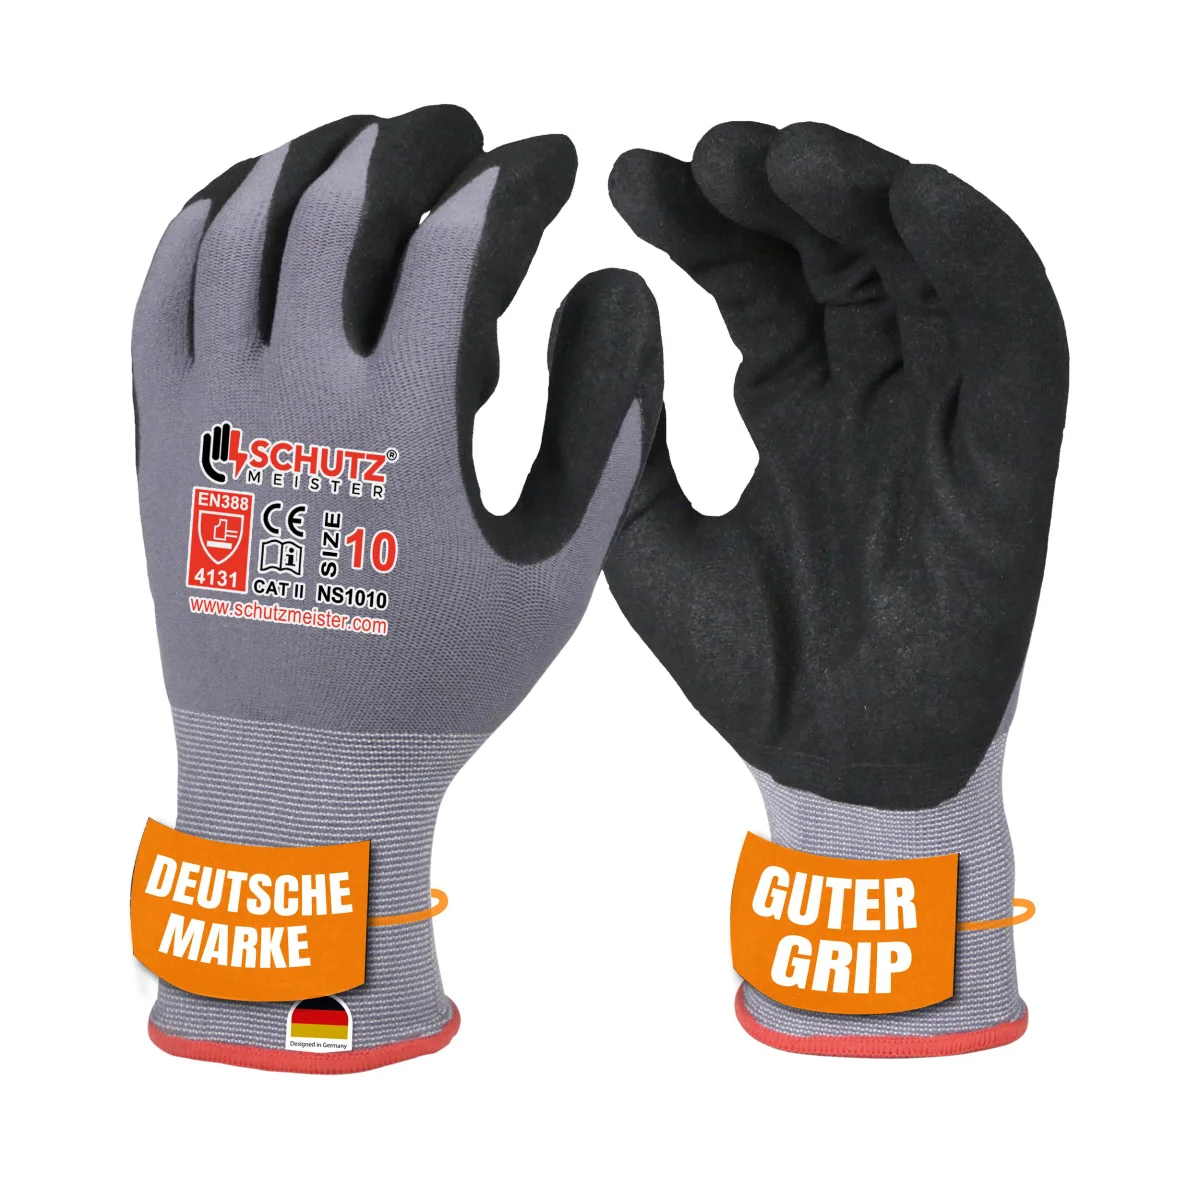 Protective master work gloves